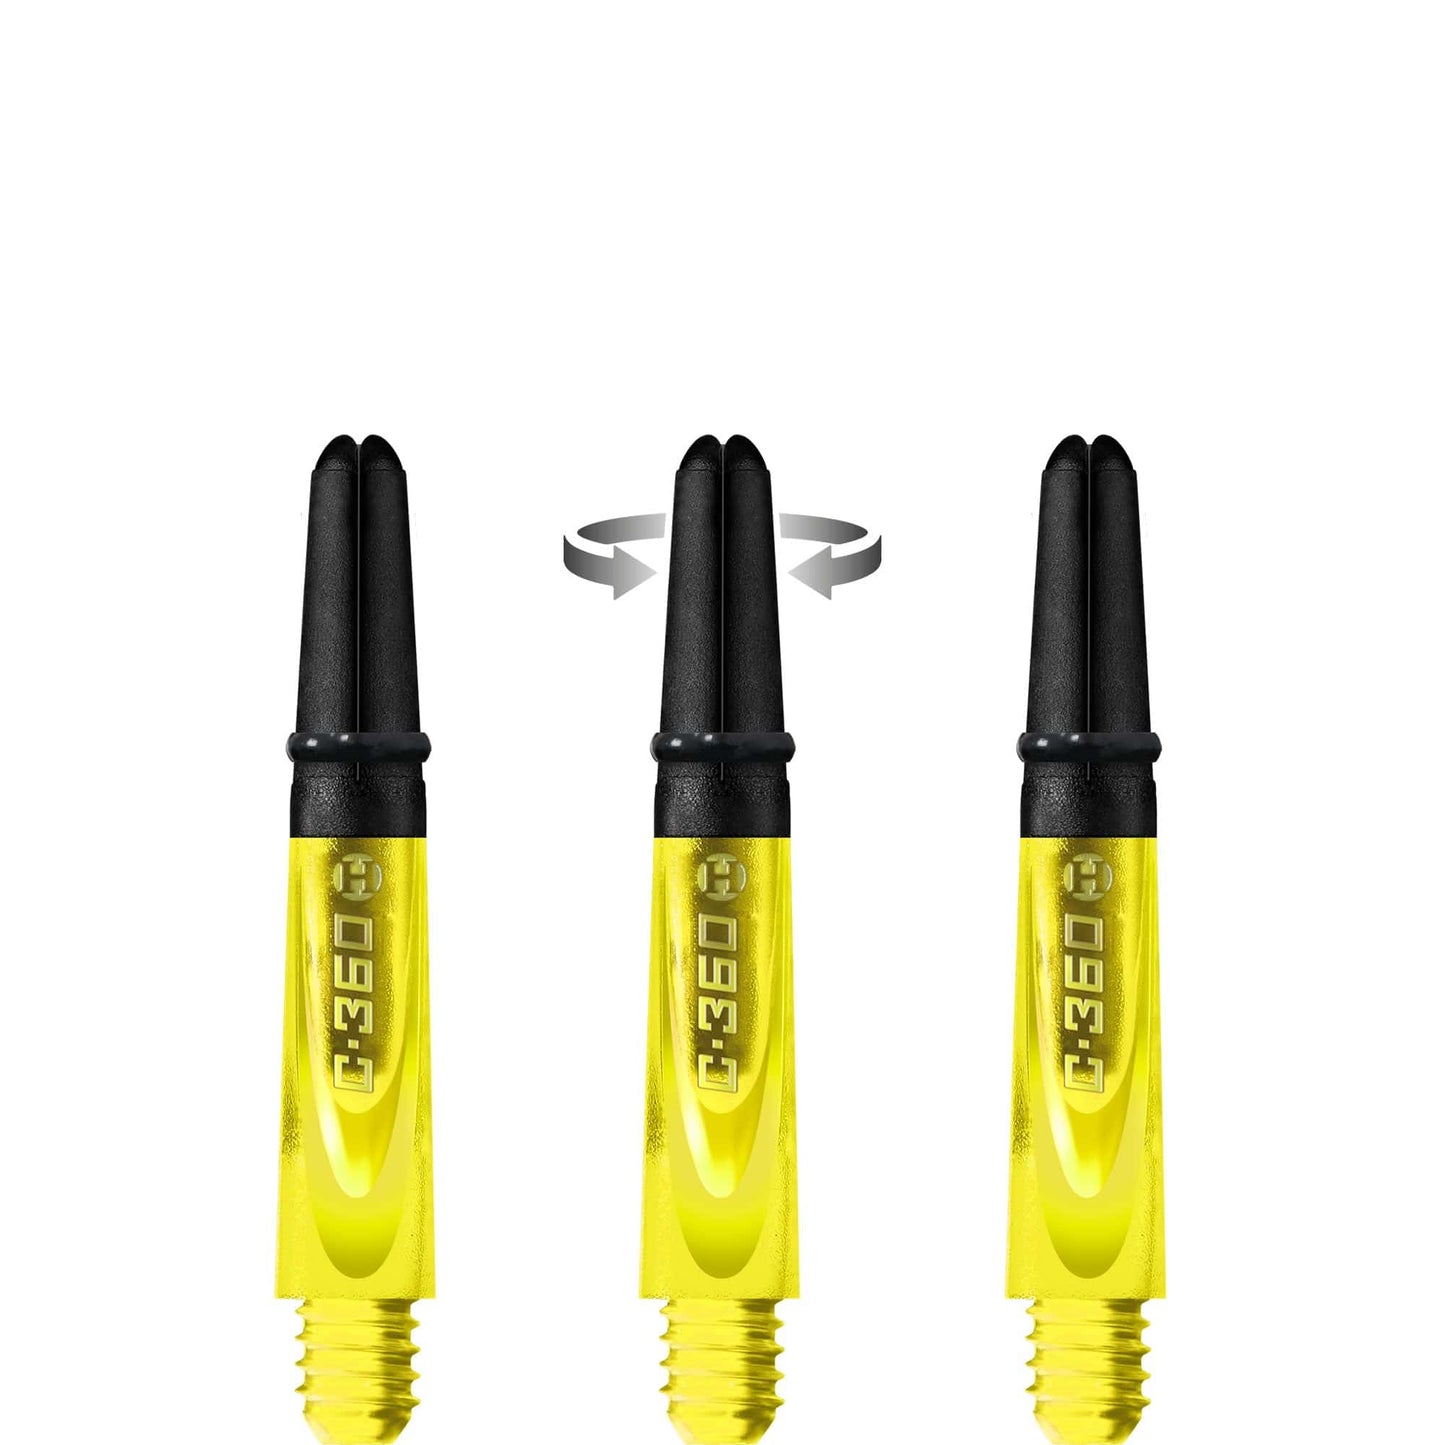 Harrows Carbon 360 Shafts - Polycarbonate Dart Stems with Carbon Top - Yellow Short